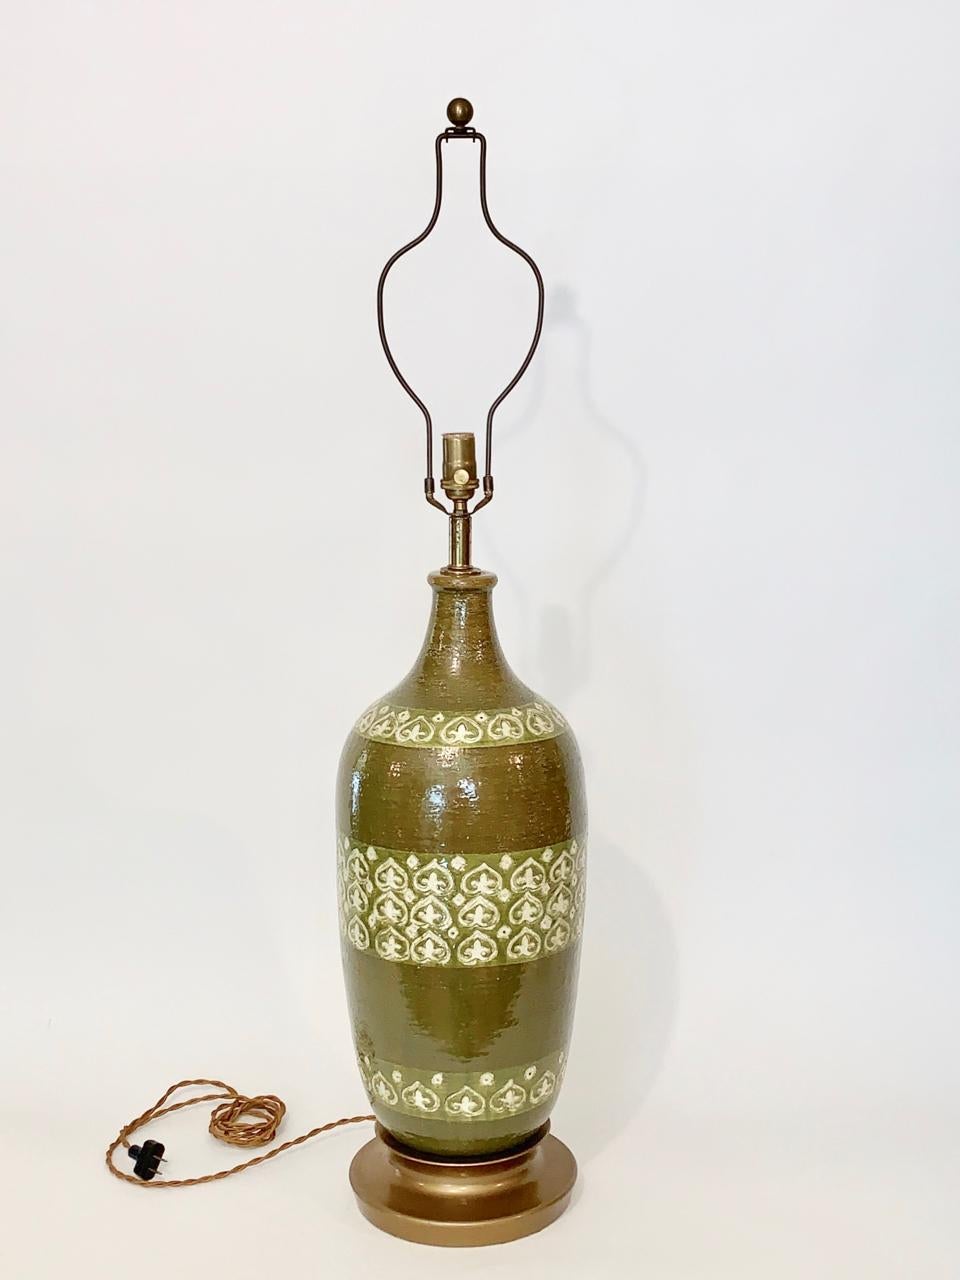 Large pair Aldo Londi for Bitossi Hand Painted Moorish Green Ceramic Table Lamps, 1950's. Featuring a large hand-crafted bottle form with banded, textured hand decorated design in Cream and Spring Green against a reflective Olive Green, Army Green